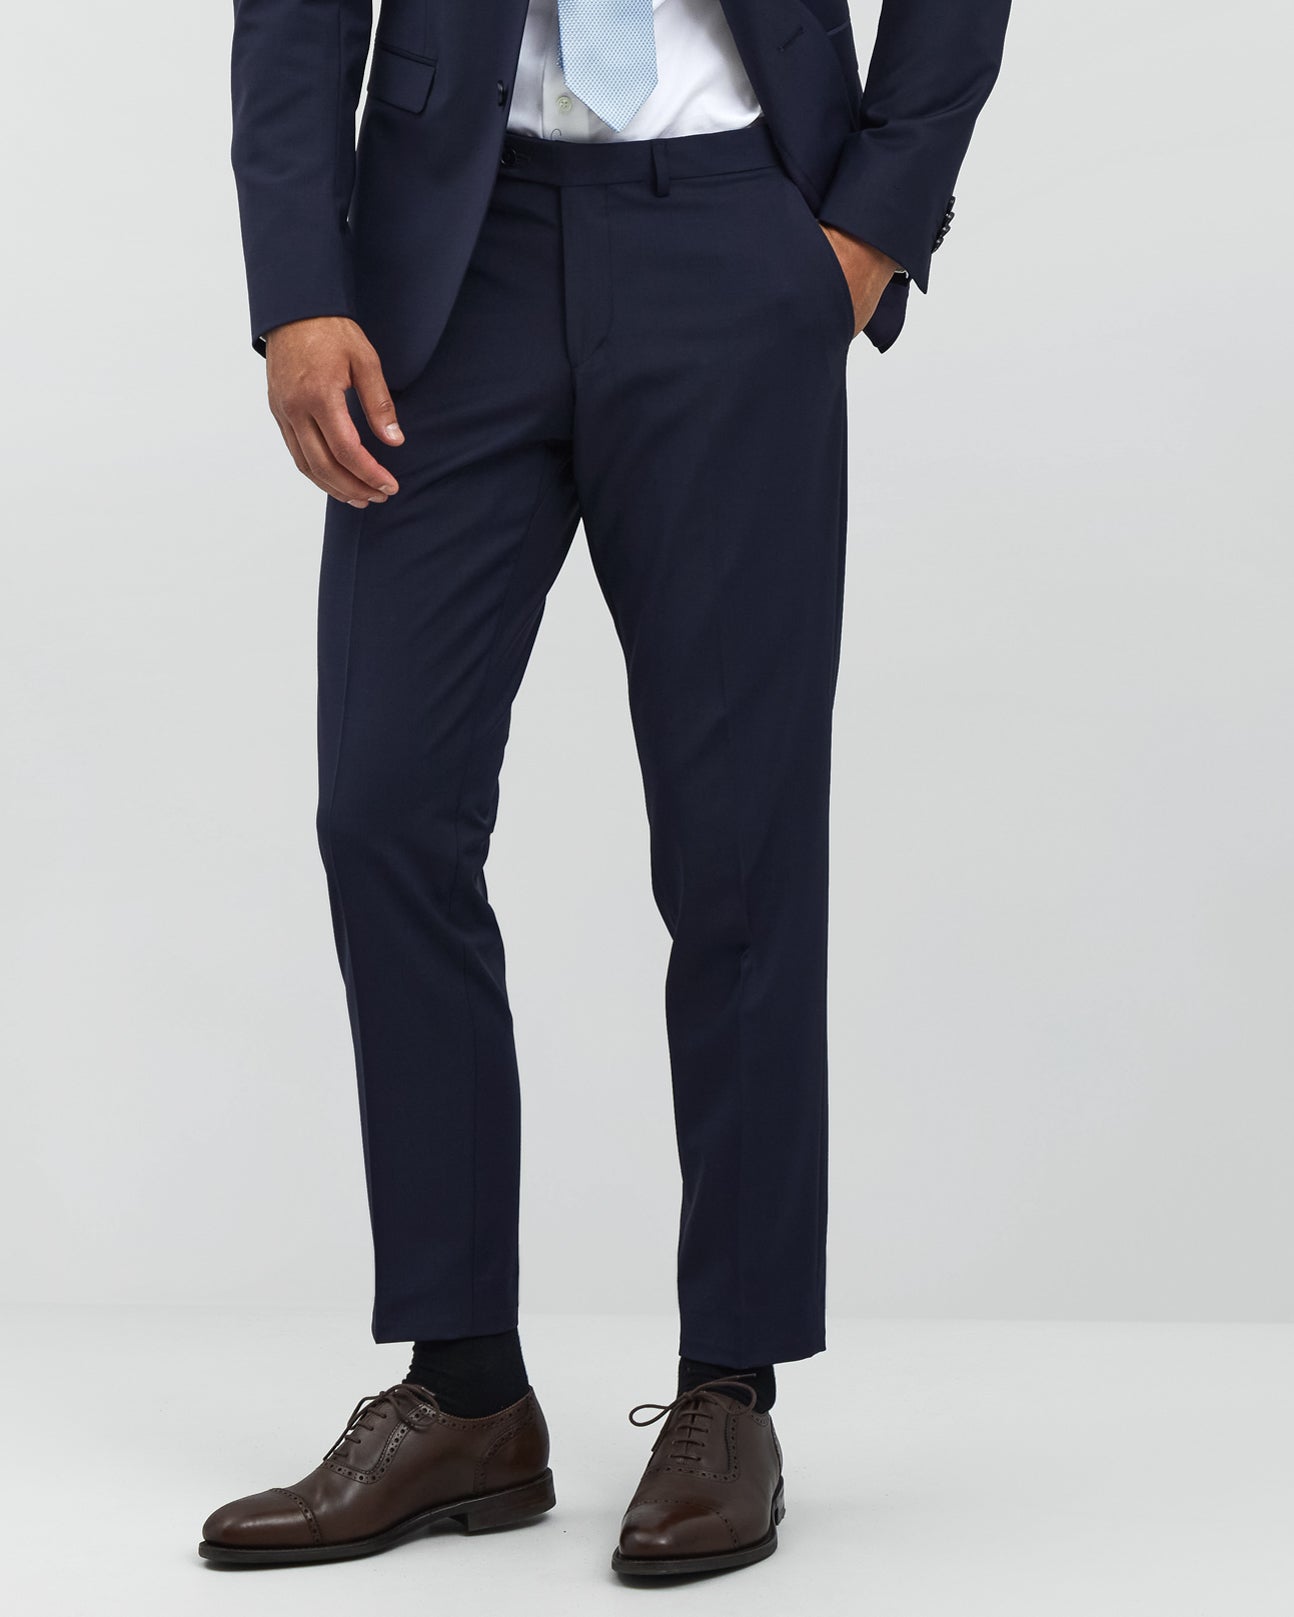 Navy Blue Athlete Fit Suit in Stretch Fabric (2079960137790)